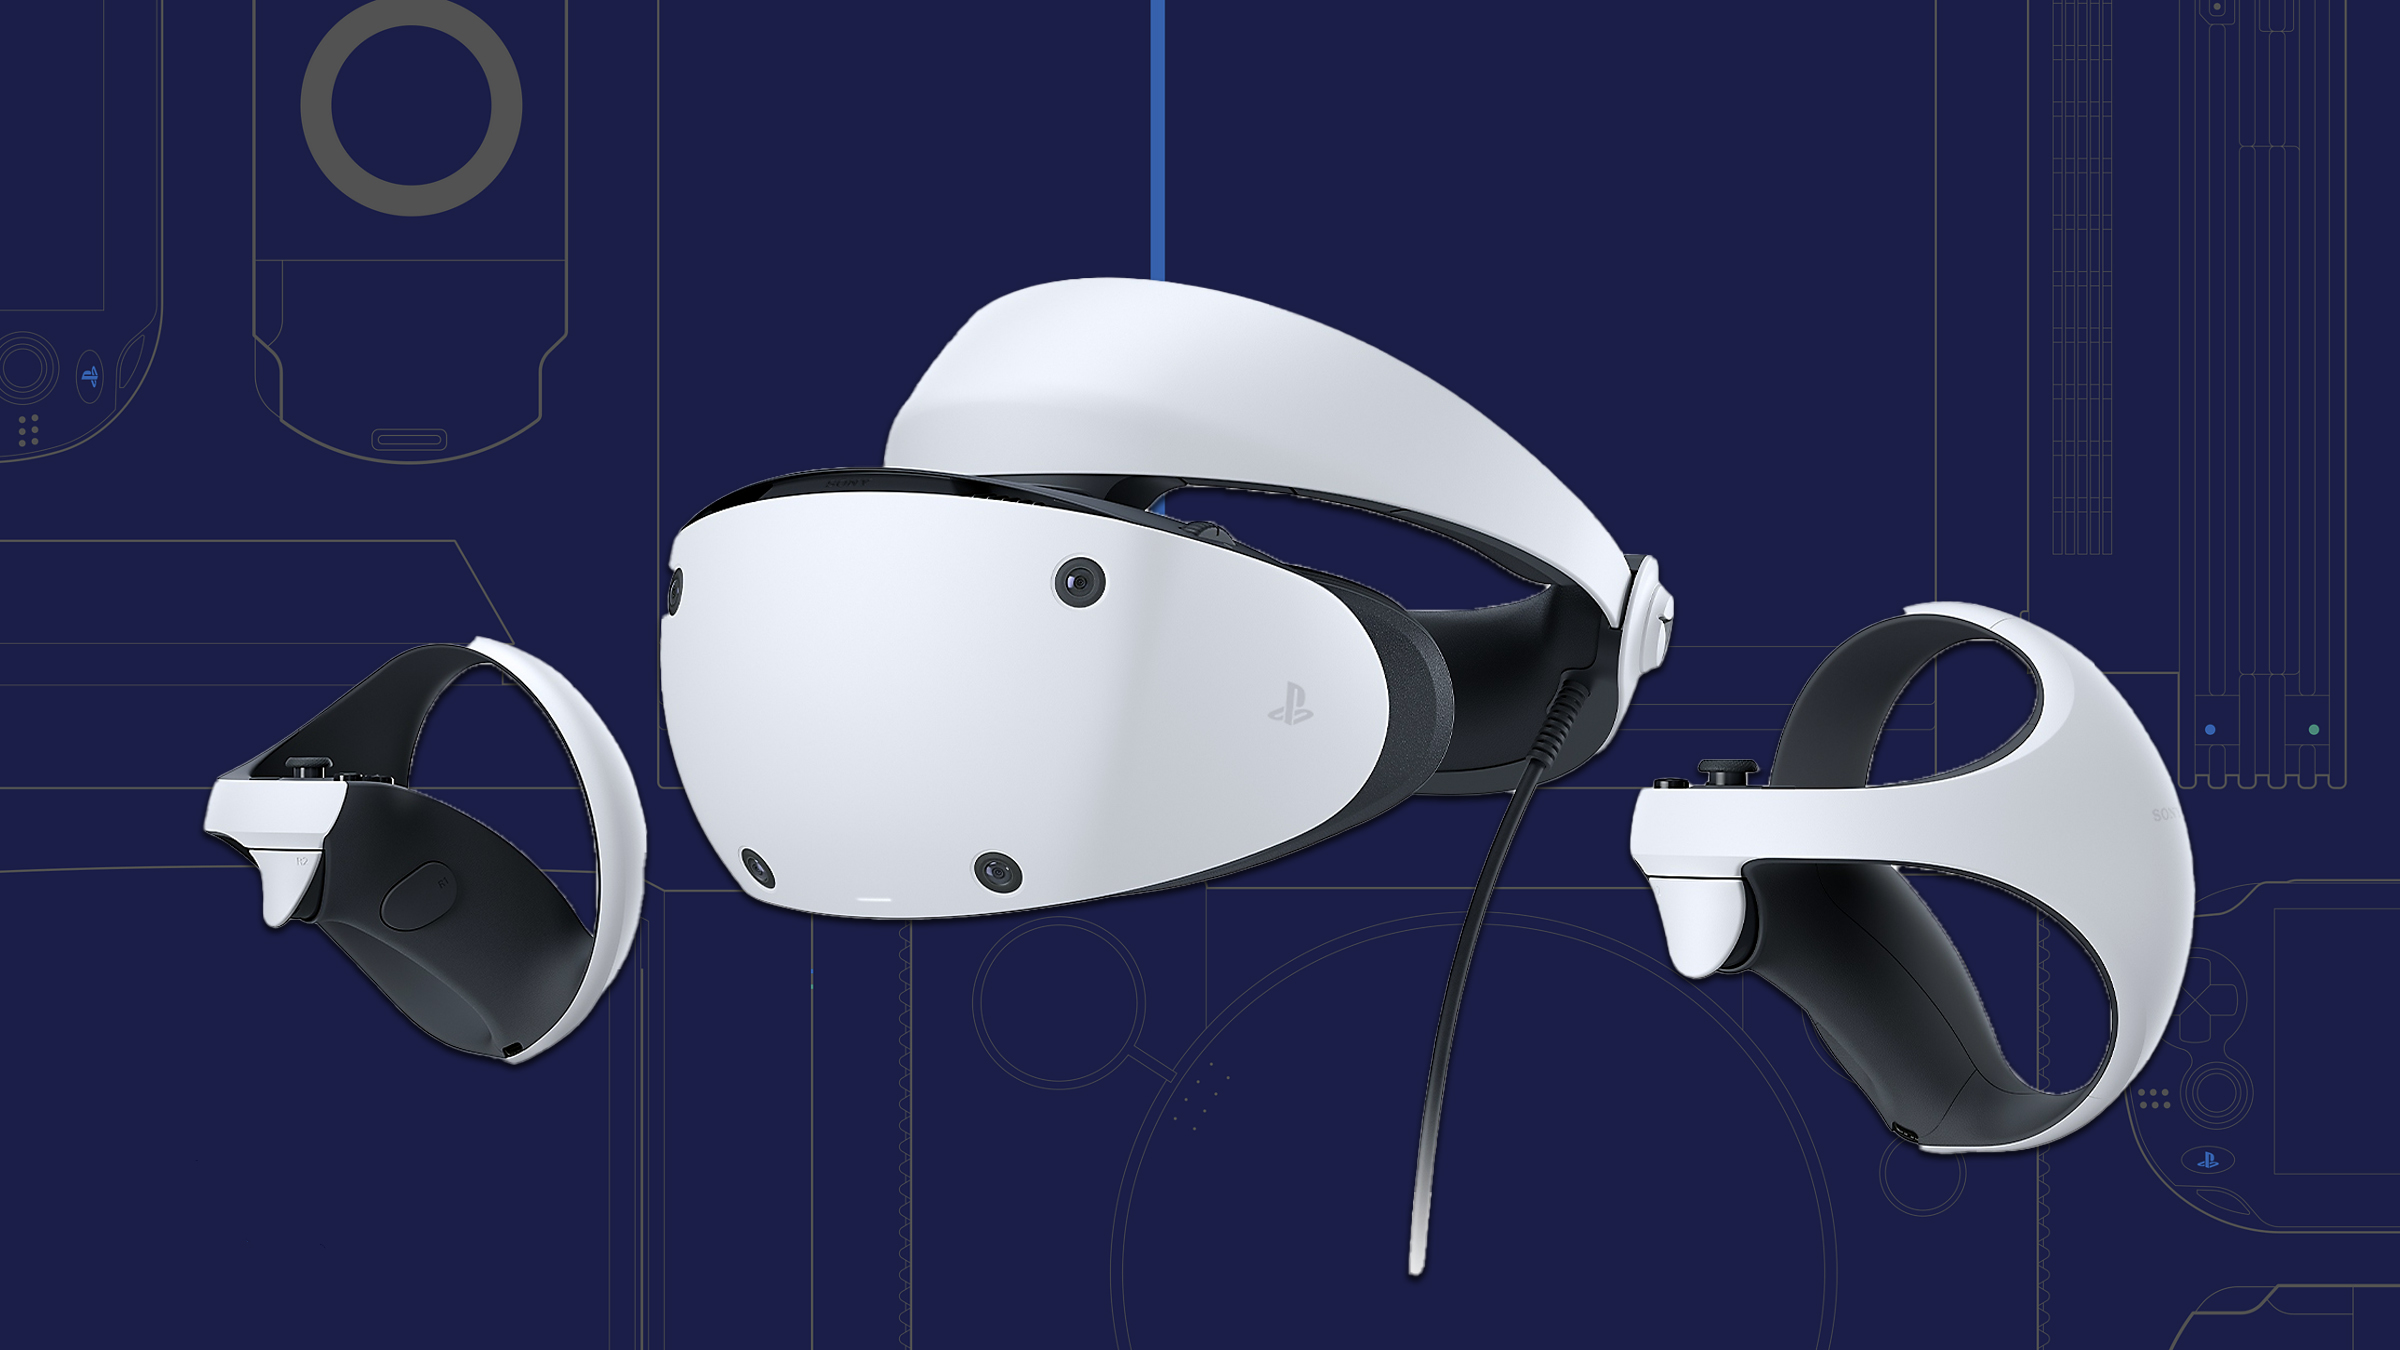 PlayStation VR 2: Does it Support PC? Here's What We Know